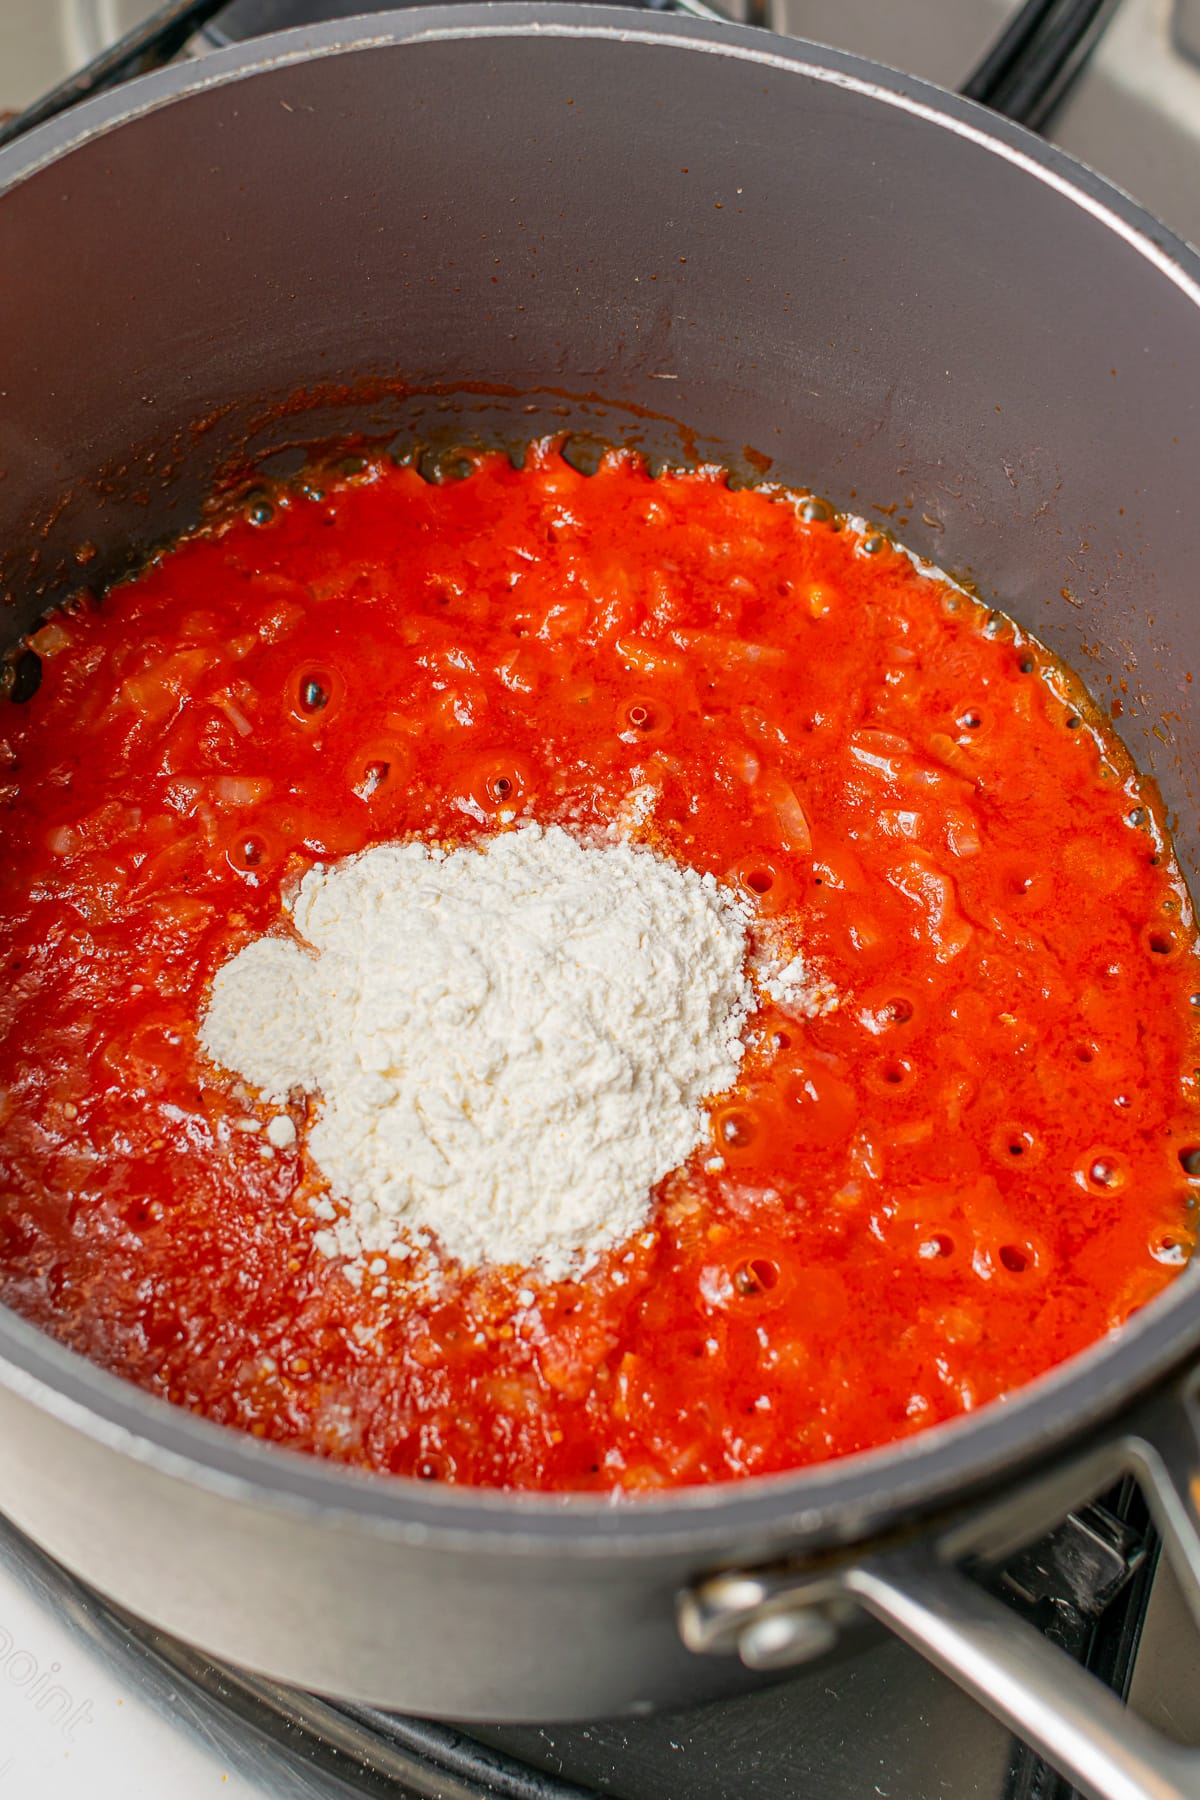 A pot on the stove with tomato sauce and a spoonful of flour added, ready for mixing.